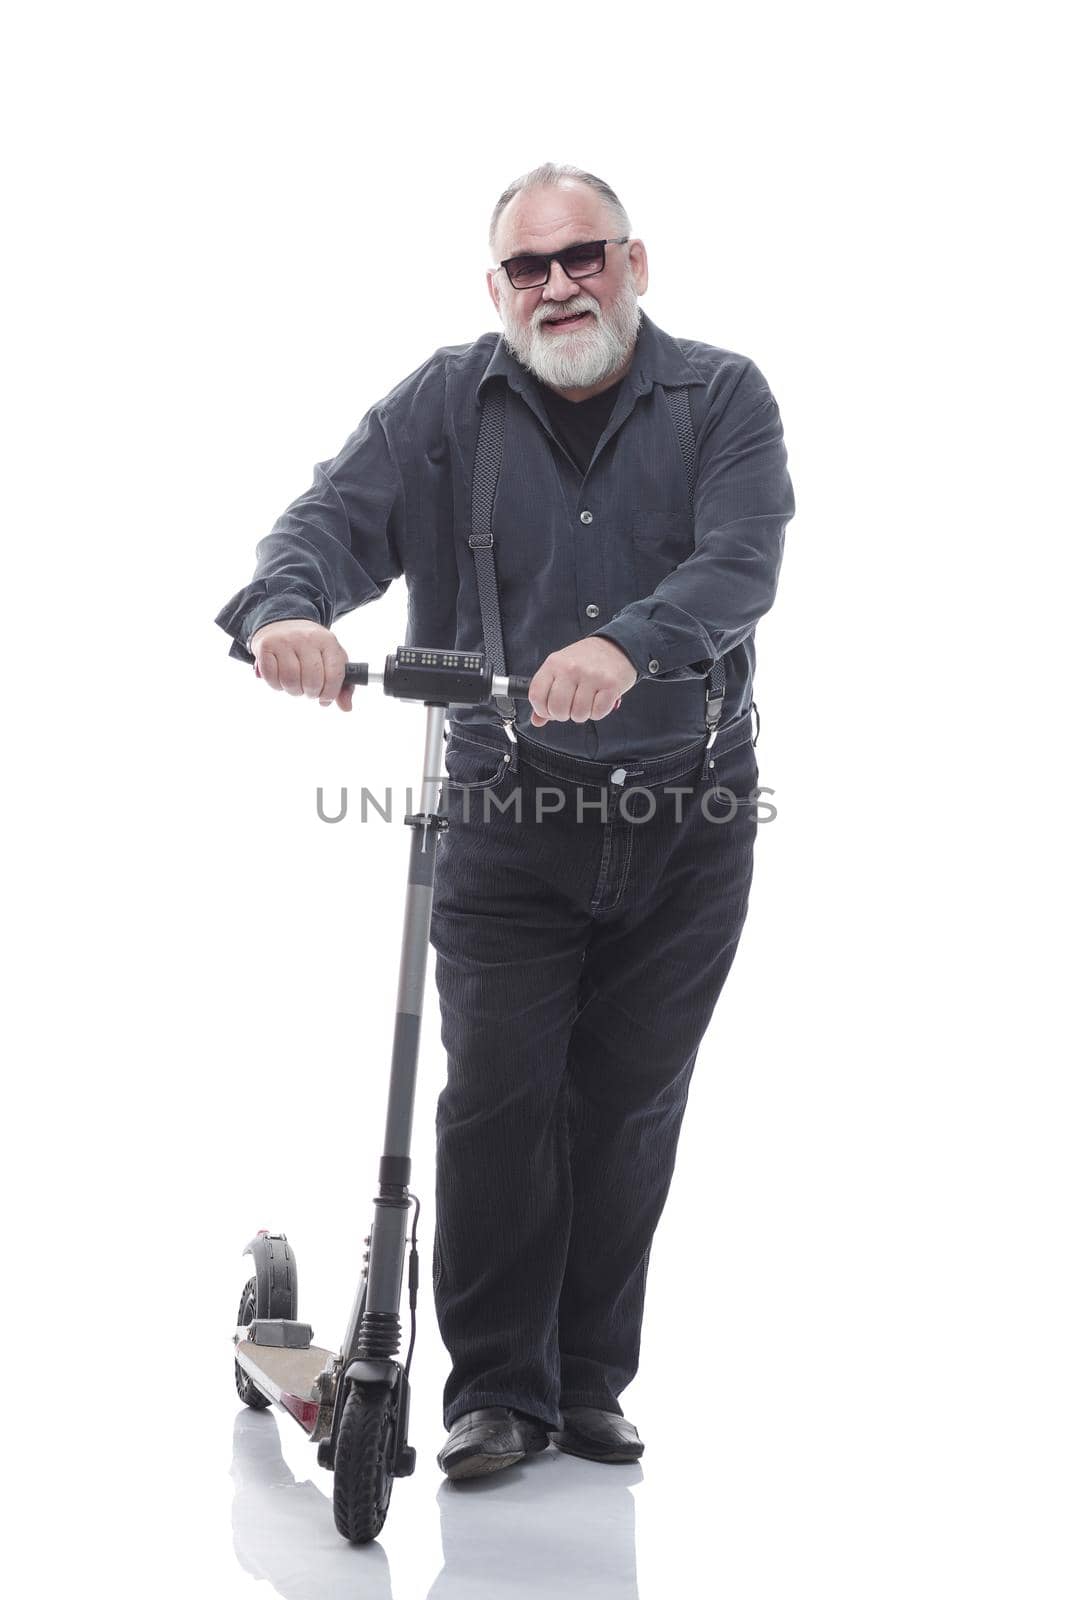 in full growth. elderly man standing on electric scooter. isolated on a white background